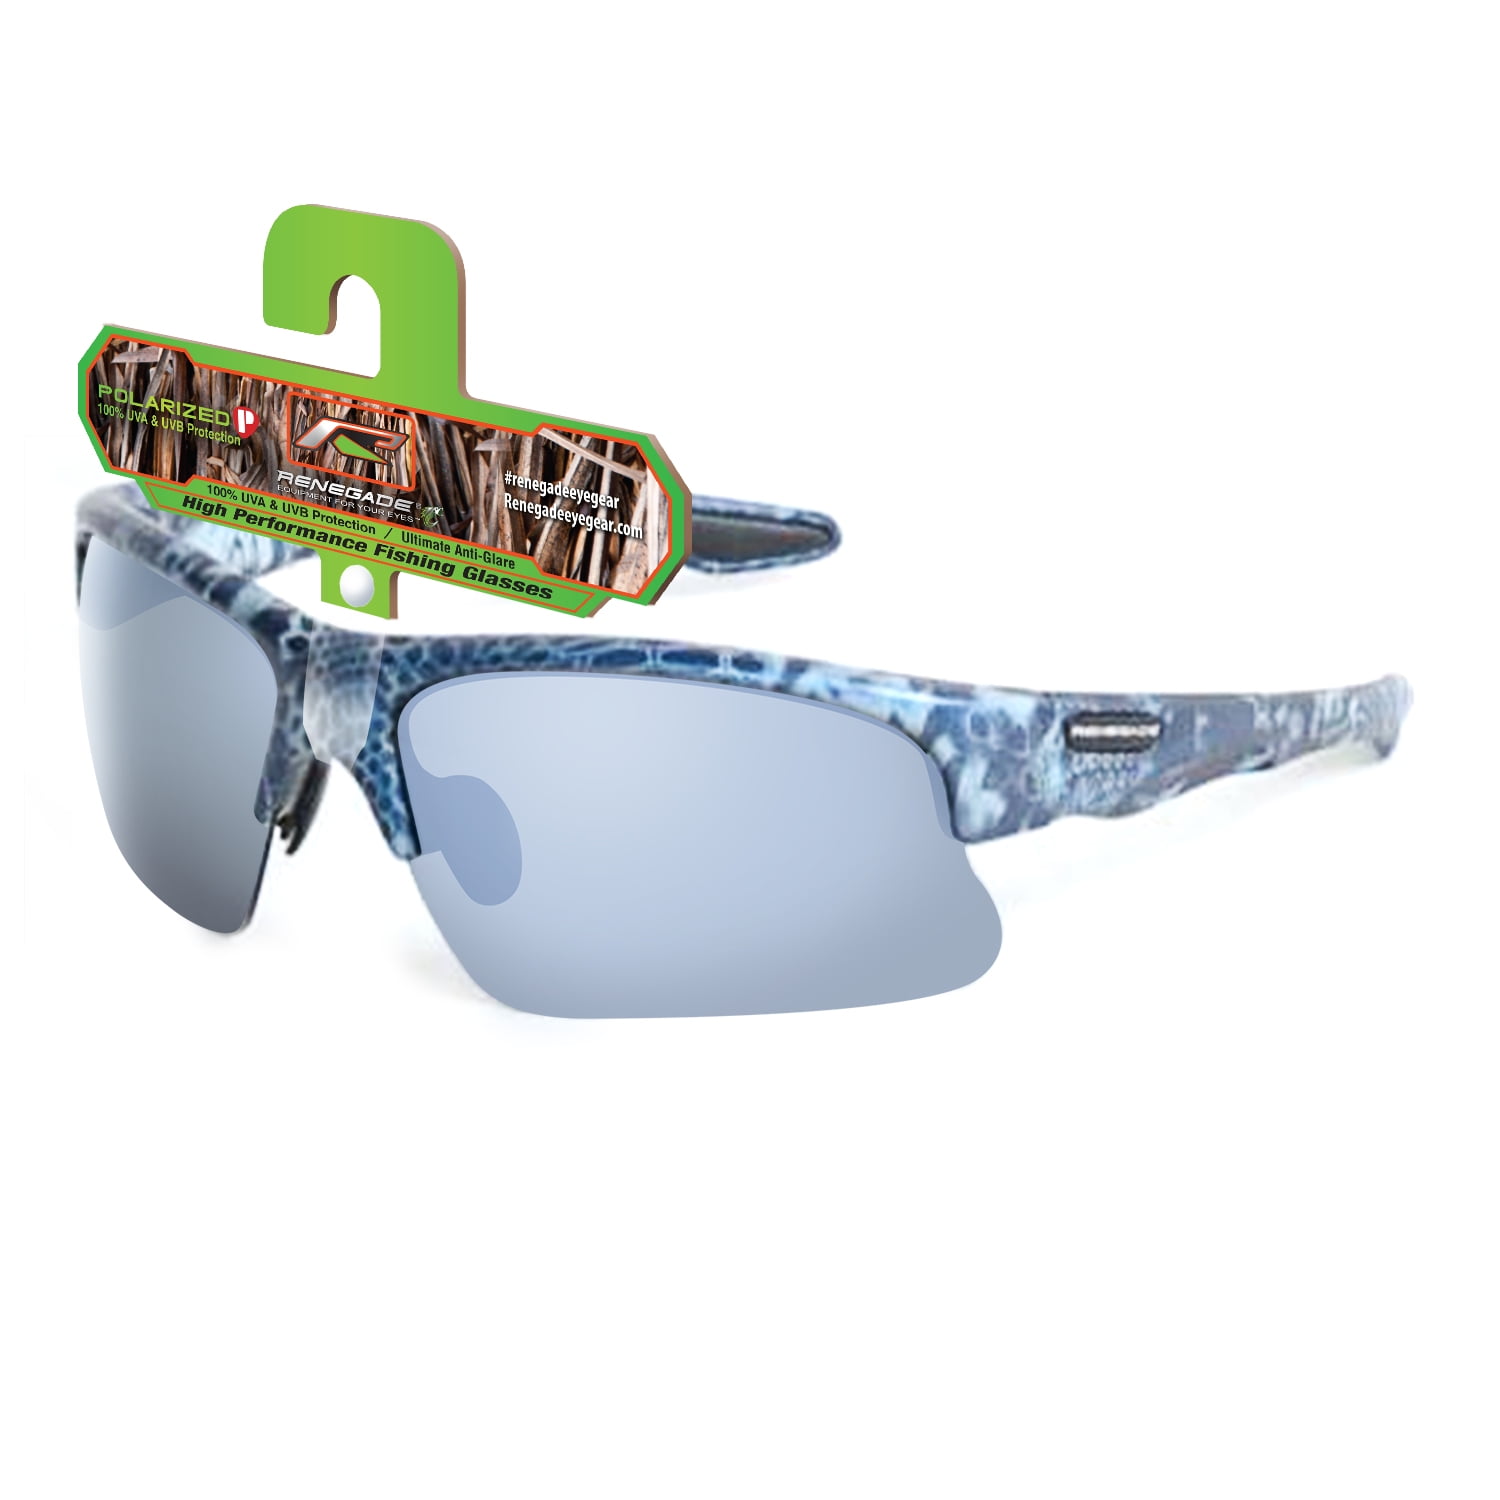 opladning Endelig Glimte Renegade Polarized Blue Camo Performance Sunglasses Male and Female-  Conceal, Adult - Walmart.com